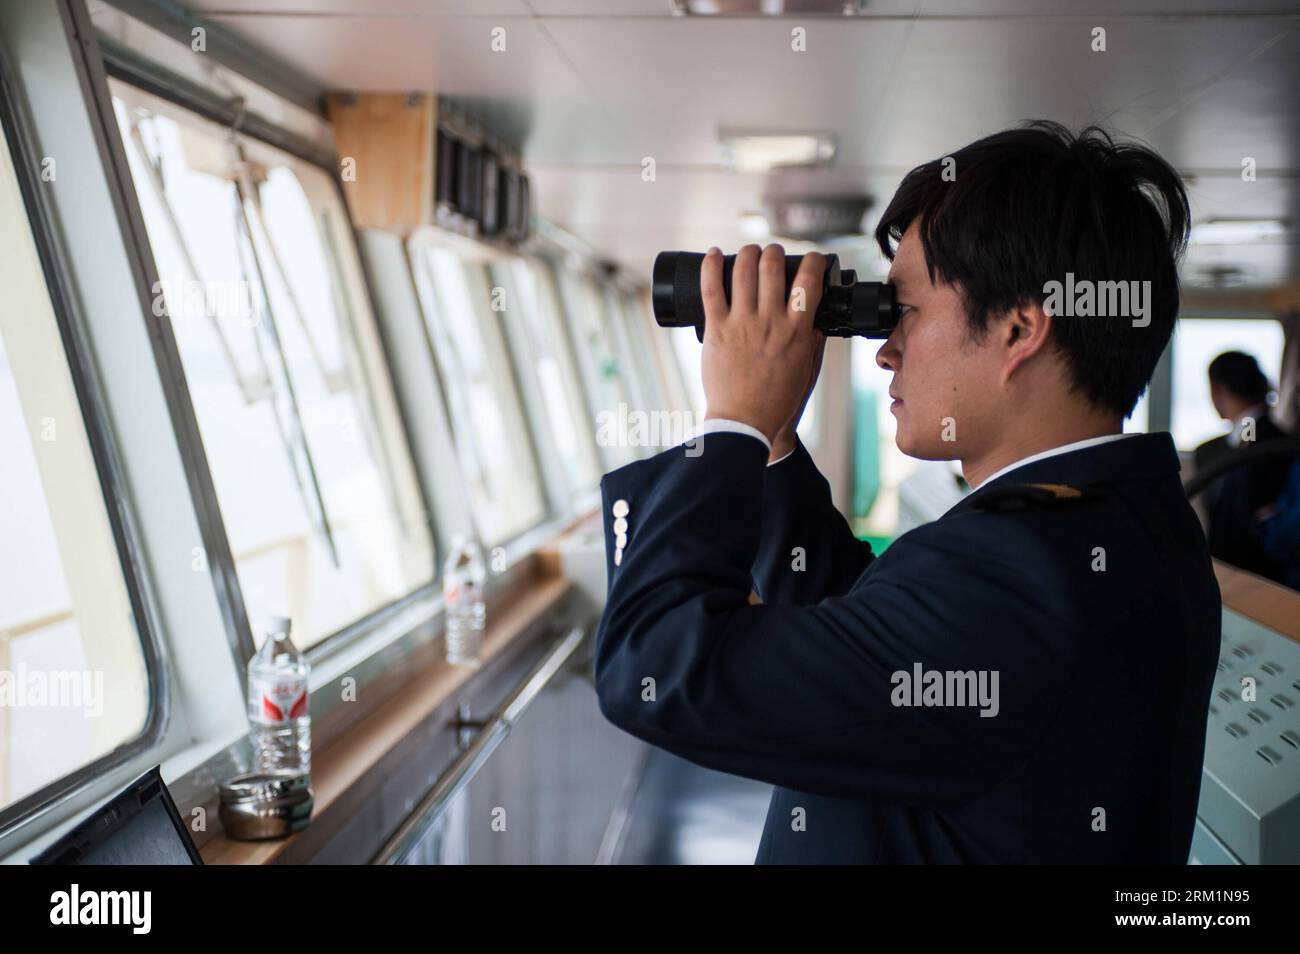 Bildnummer: 59604351  Datum: 24.04.2013  Copyright: imago/Xinhua NANJING, 2013 -- Zhu Hui checks sailing conditions using telescope aboard the Maple Star on the Yangtze River in east China s Jiangsu Province, April 24, 2013. Wang Lianmiao and Zhu Hui arrived at the port of Jingjiang on the morning of April 24, 2013. Both men are inland waterway pilots from the Yangtze River Pilot Centre. Awaiting them was the Maple Star, a 180-meter-long Marshall Islands-flagged cargo ship with a gross register tonnage of over 23,000. Under their pilotage, the Maple Star was to veer 180 degrees and head downst Stock Photo